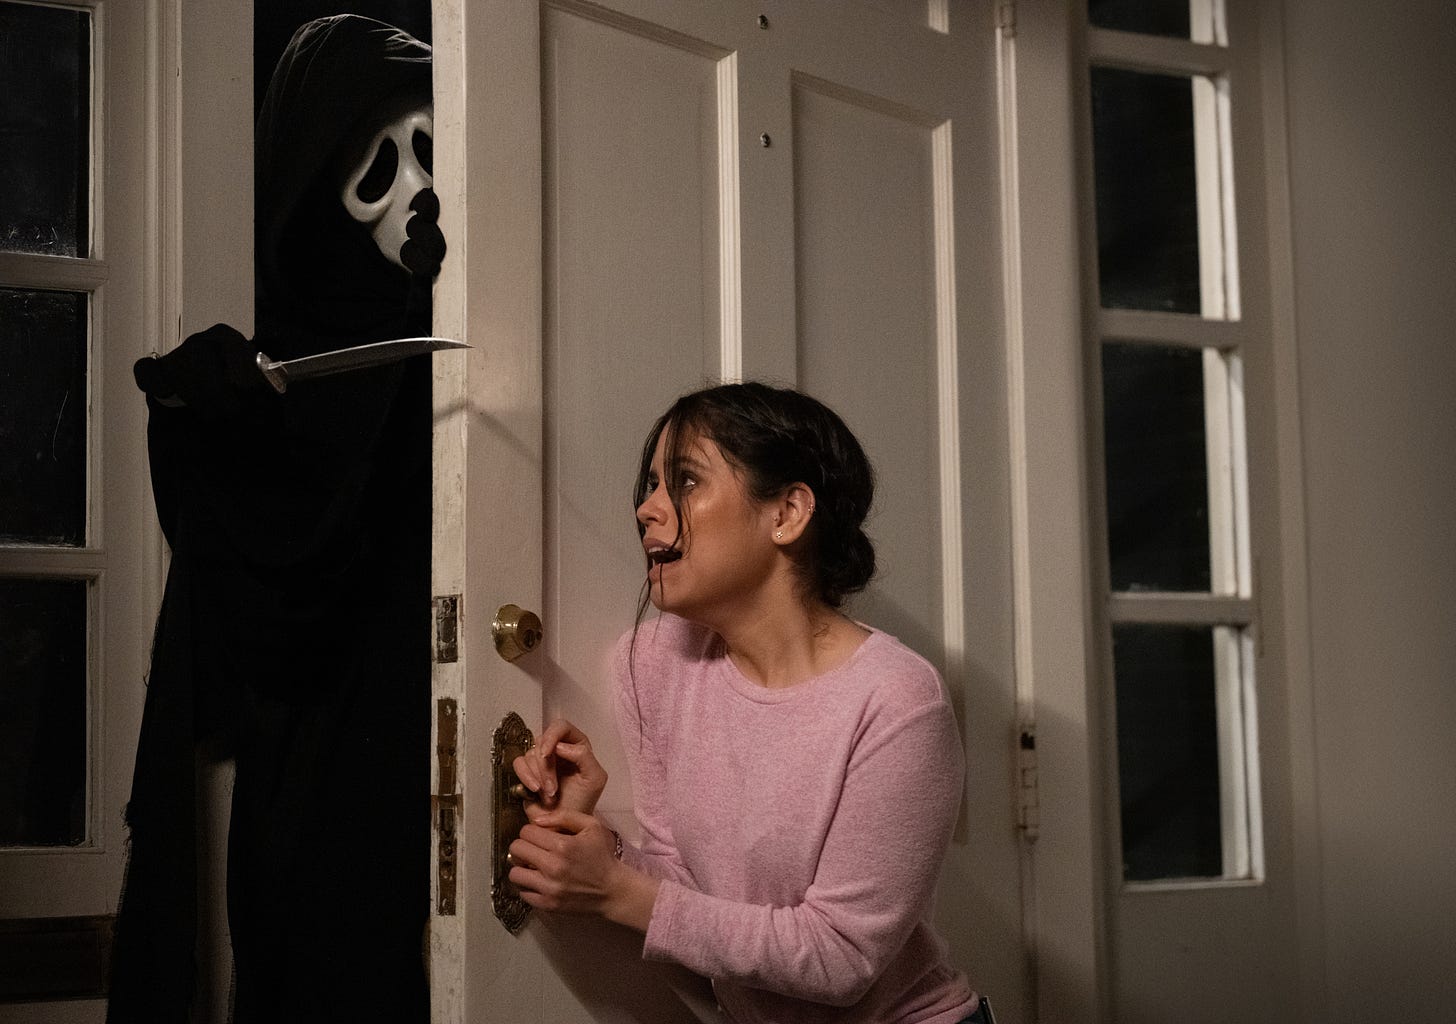 Scream': Everything You Need to Know From Wes Craven's Original Series  Before Seeing 'Scream 5'